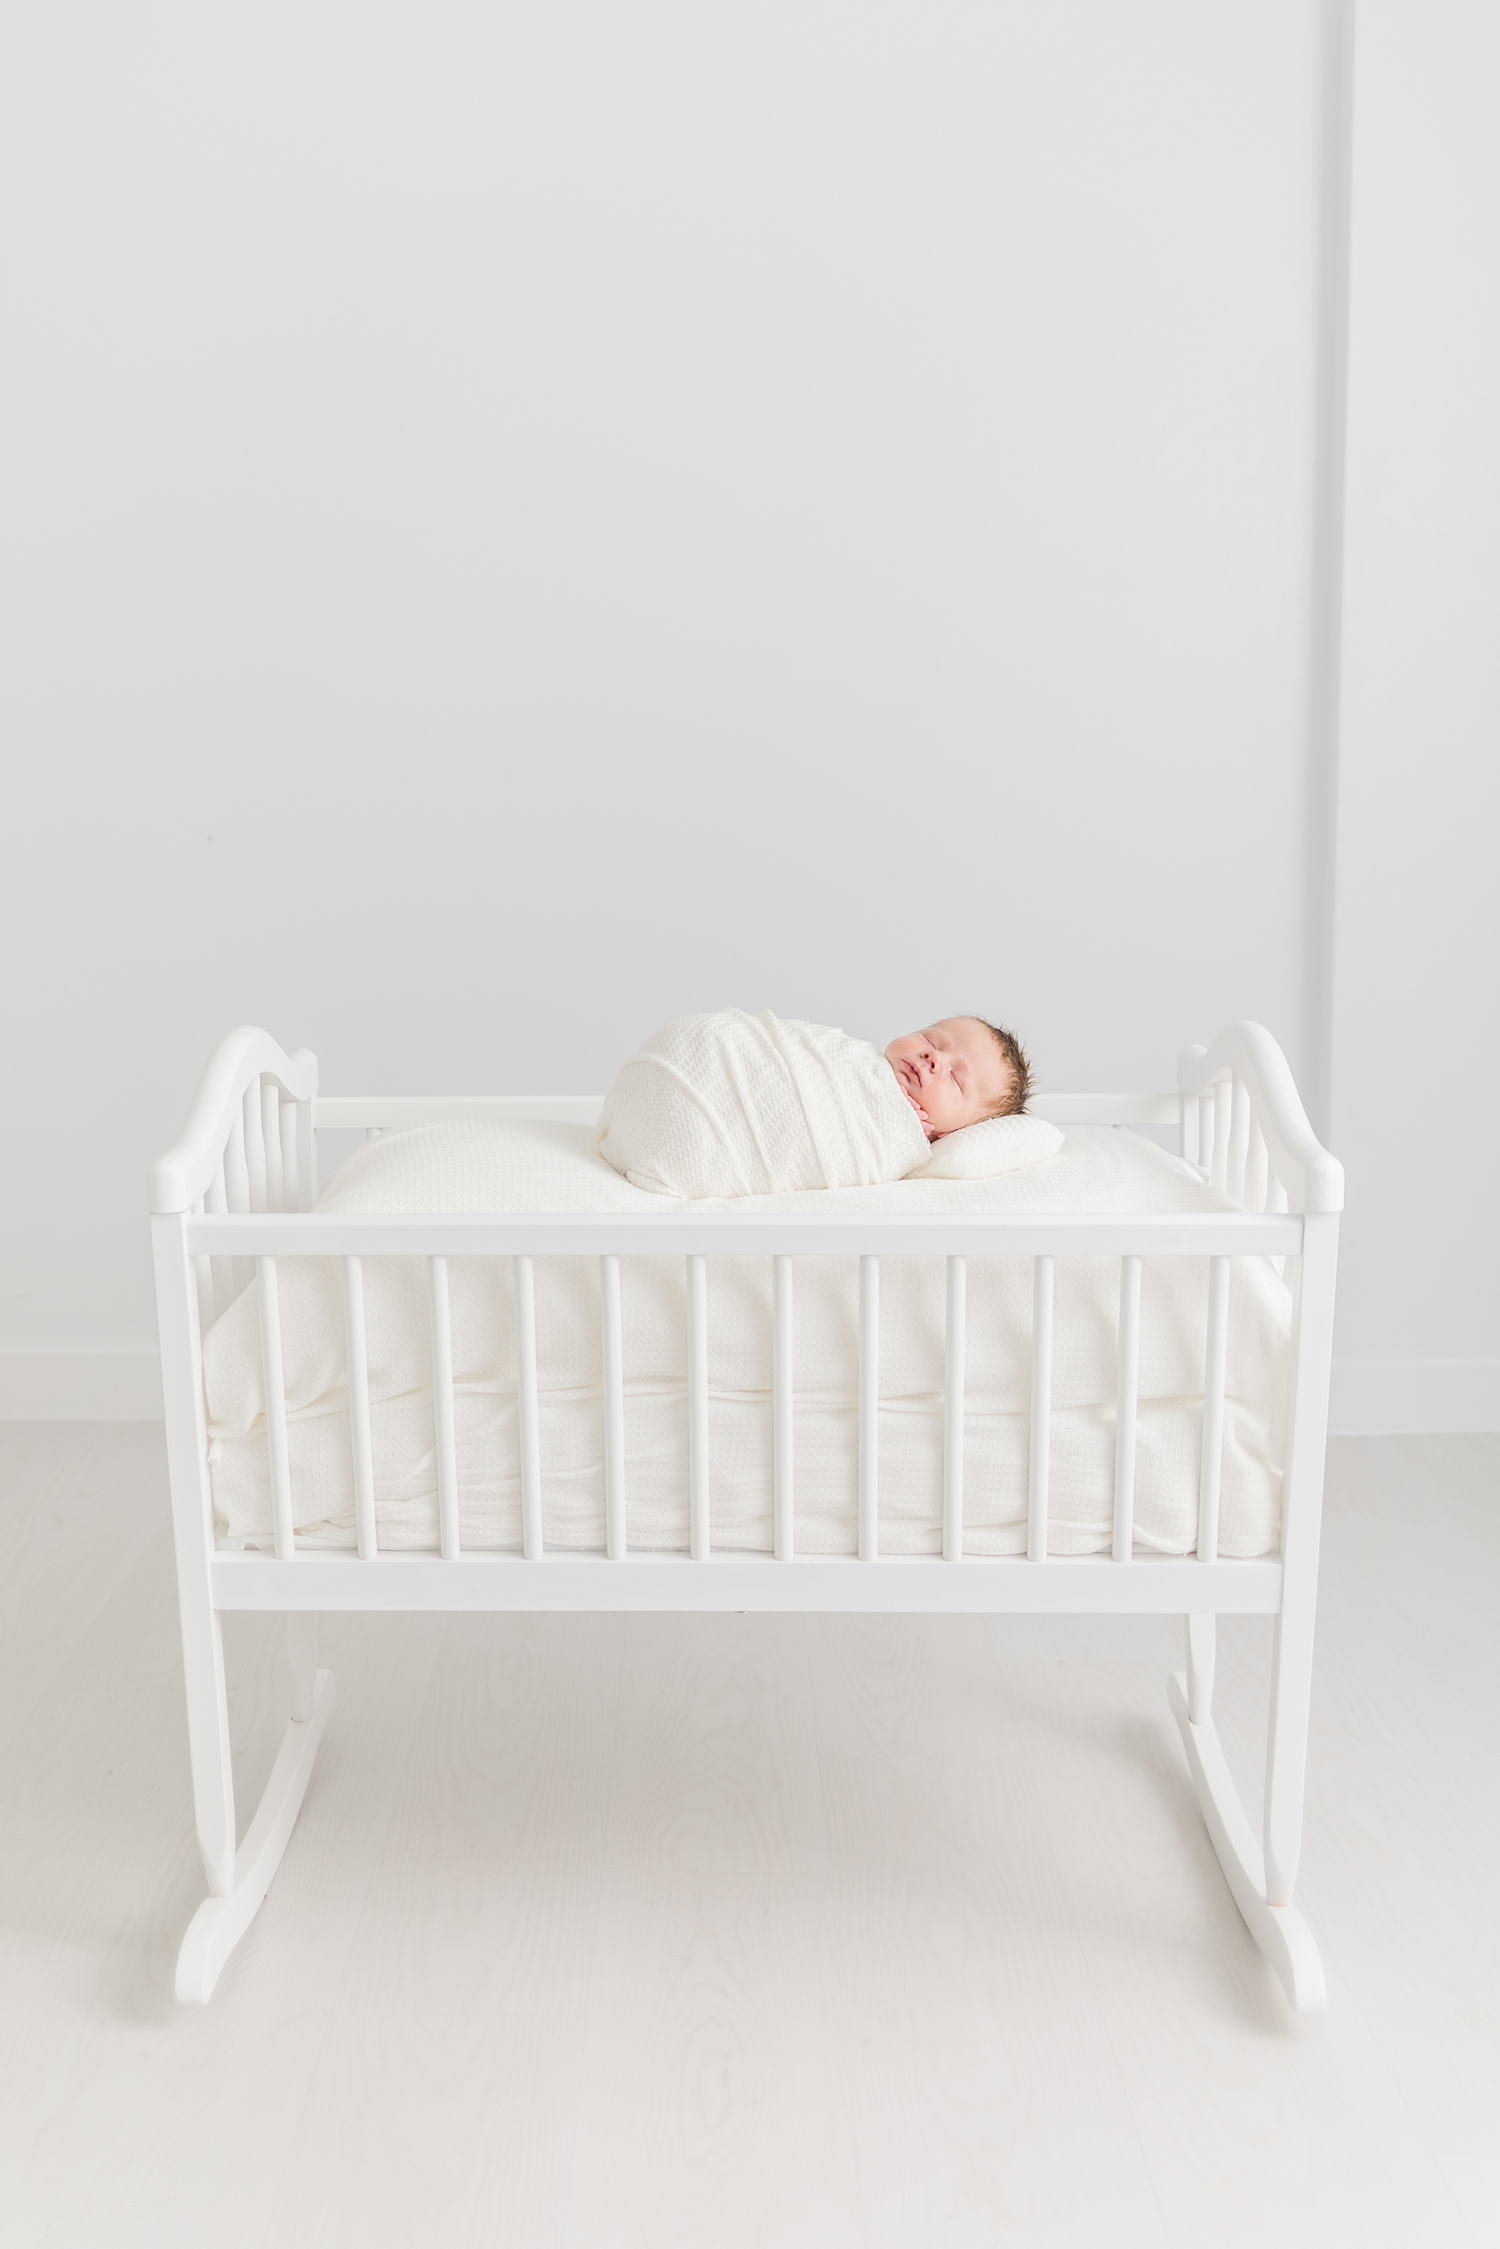 Baby Lane sleeps on an all wooden cradle in an all white room | CB Studio